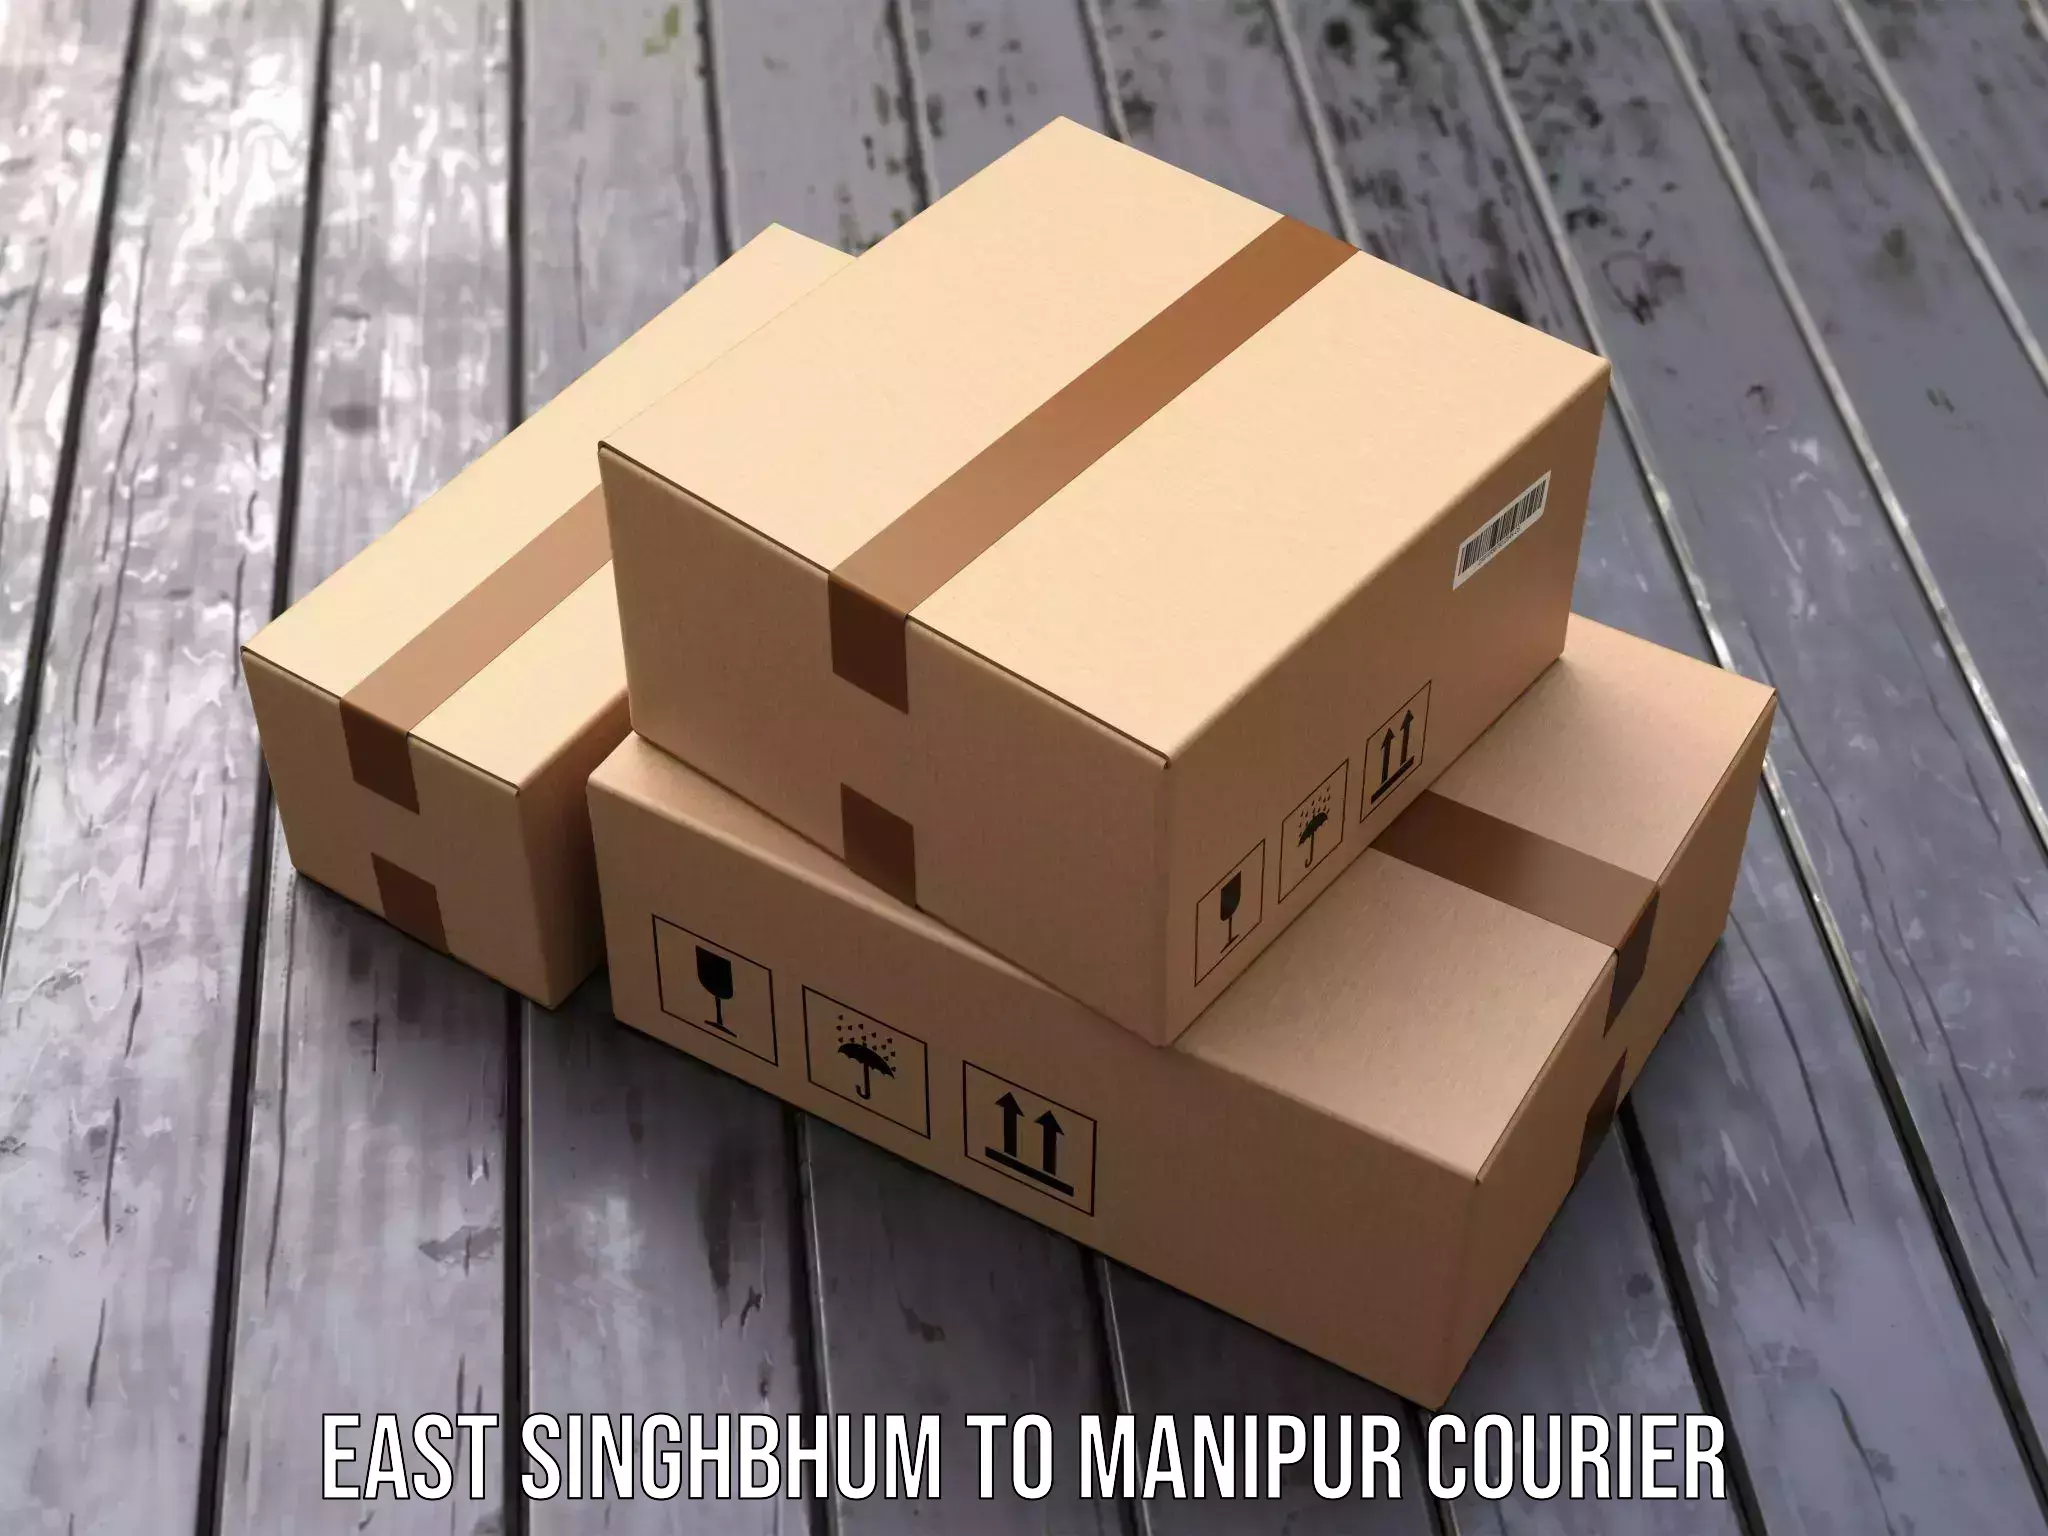 24-hour courier service East Singhbhum to Chandel